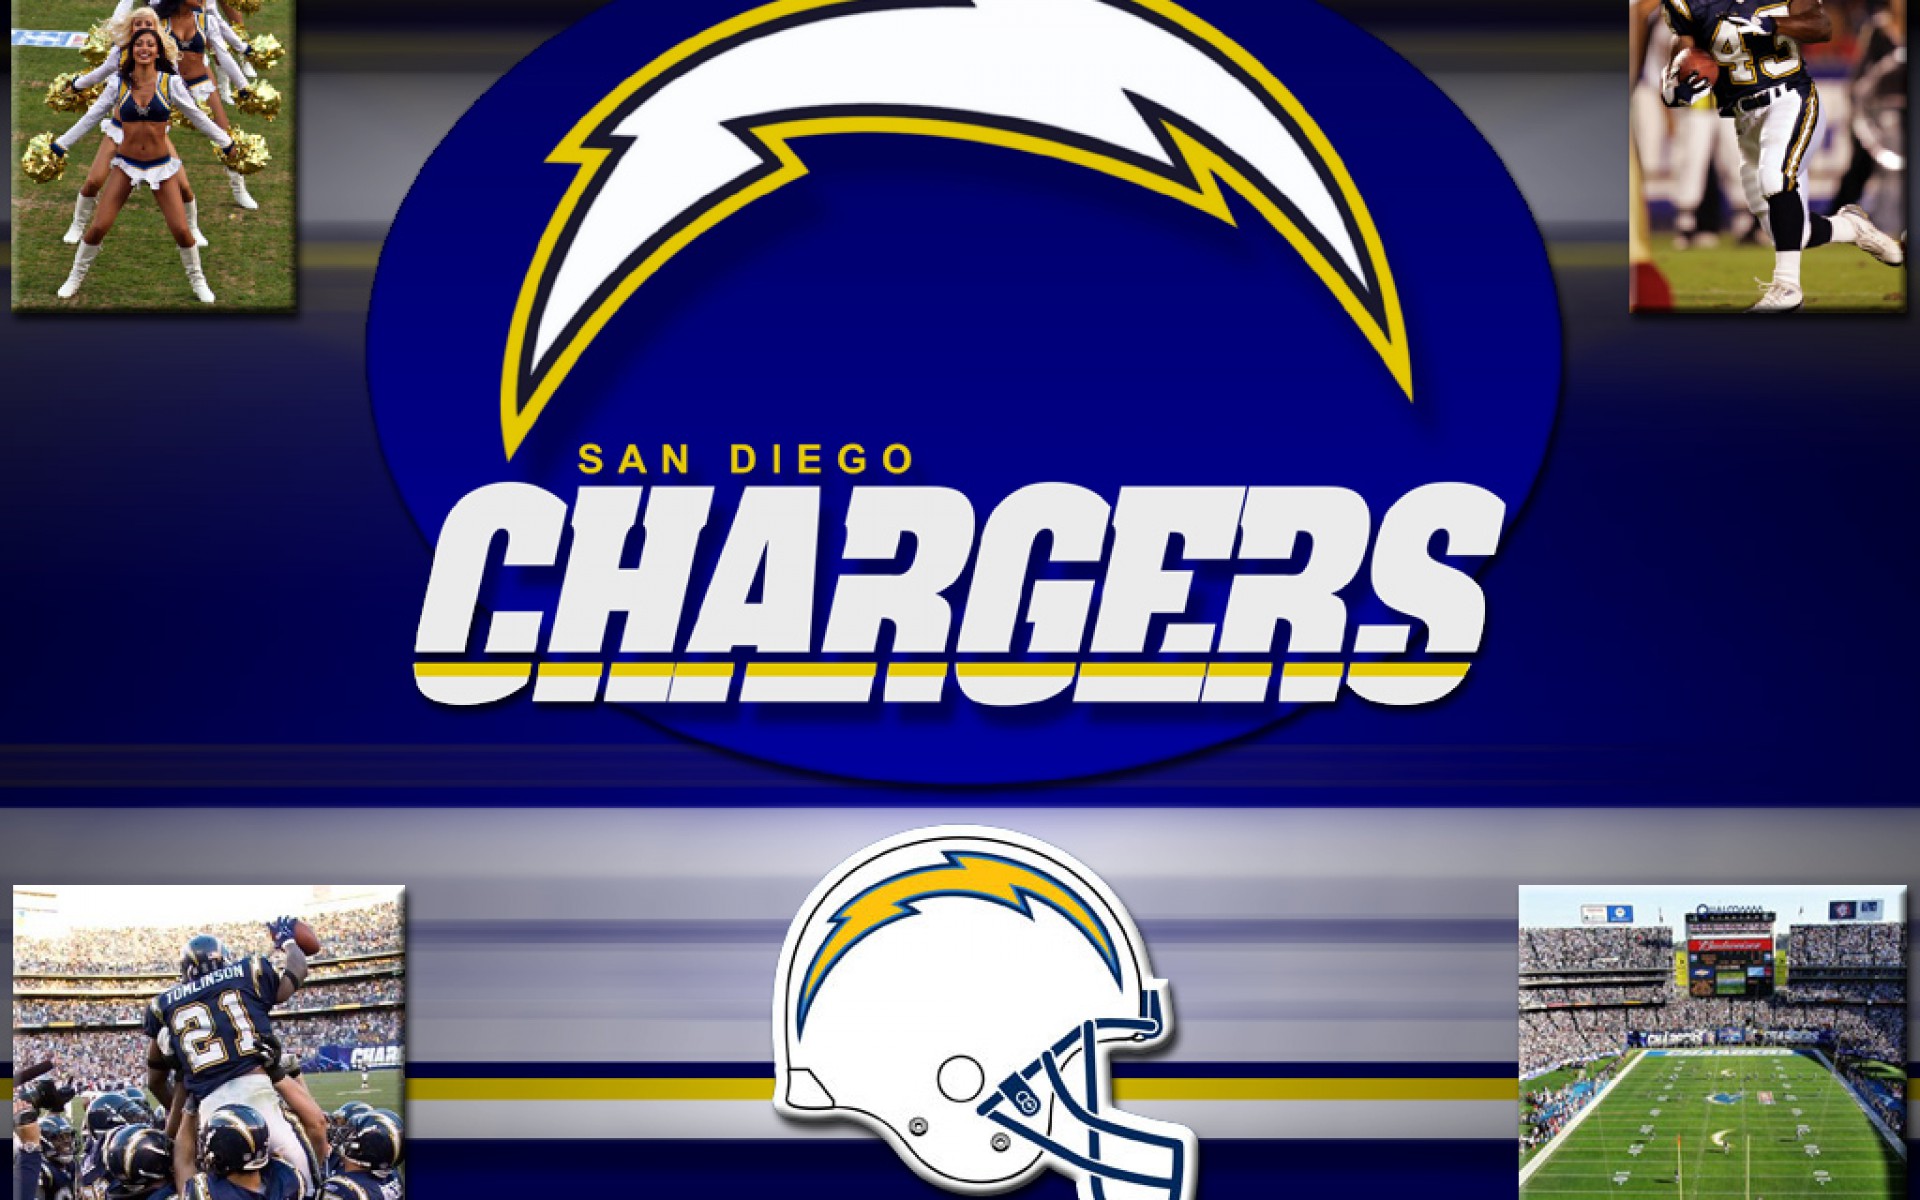 SAN DIEGO CHARGERS nfl football nm wallpaper 1920x1200 158087